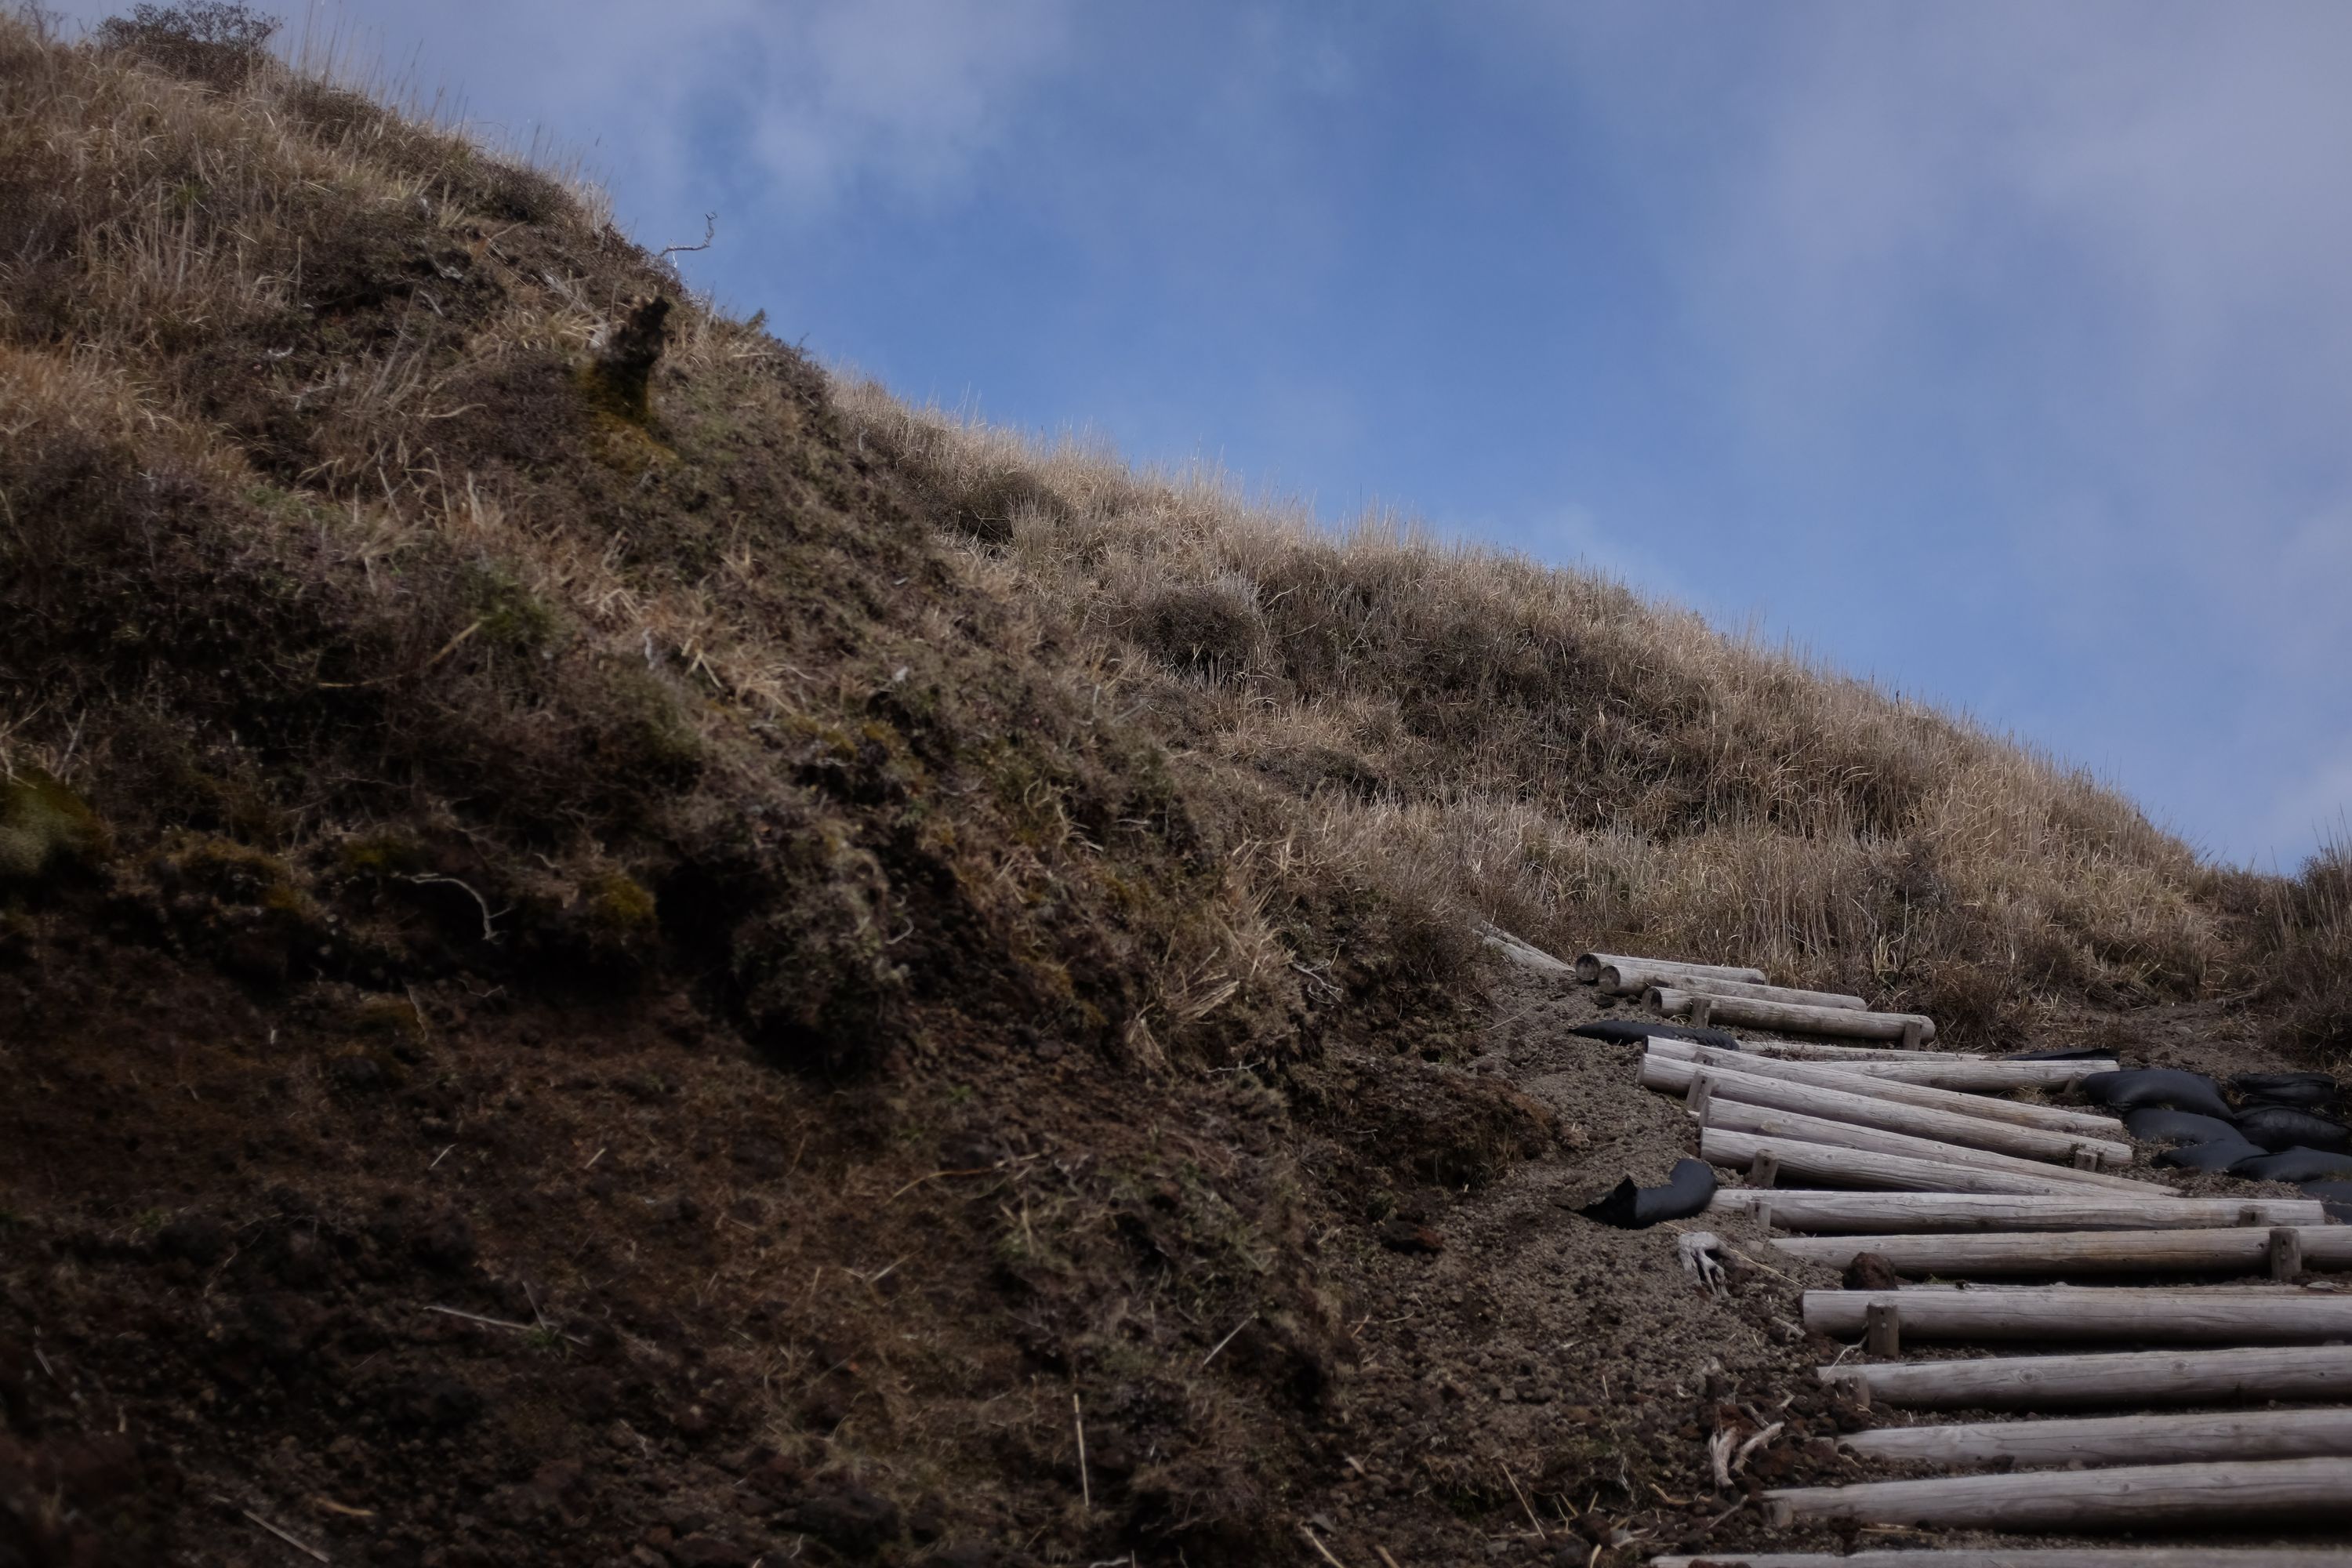 Wooden steps lead up the side of a mountain.